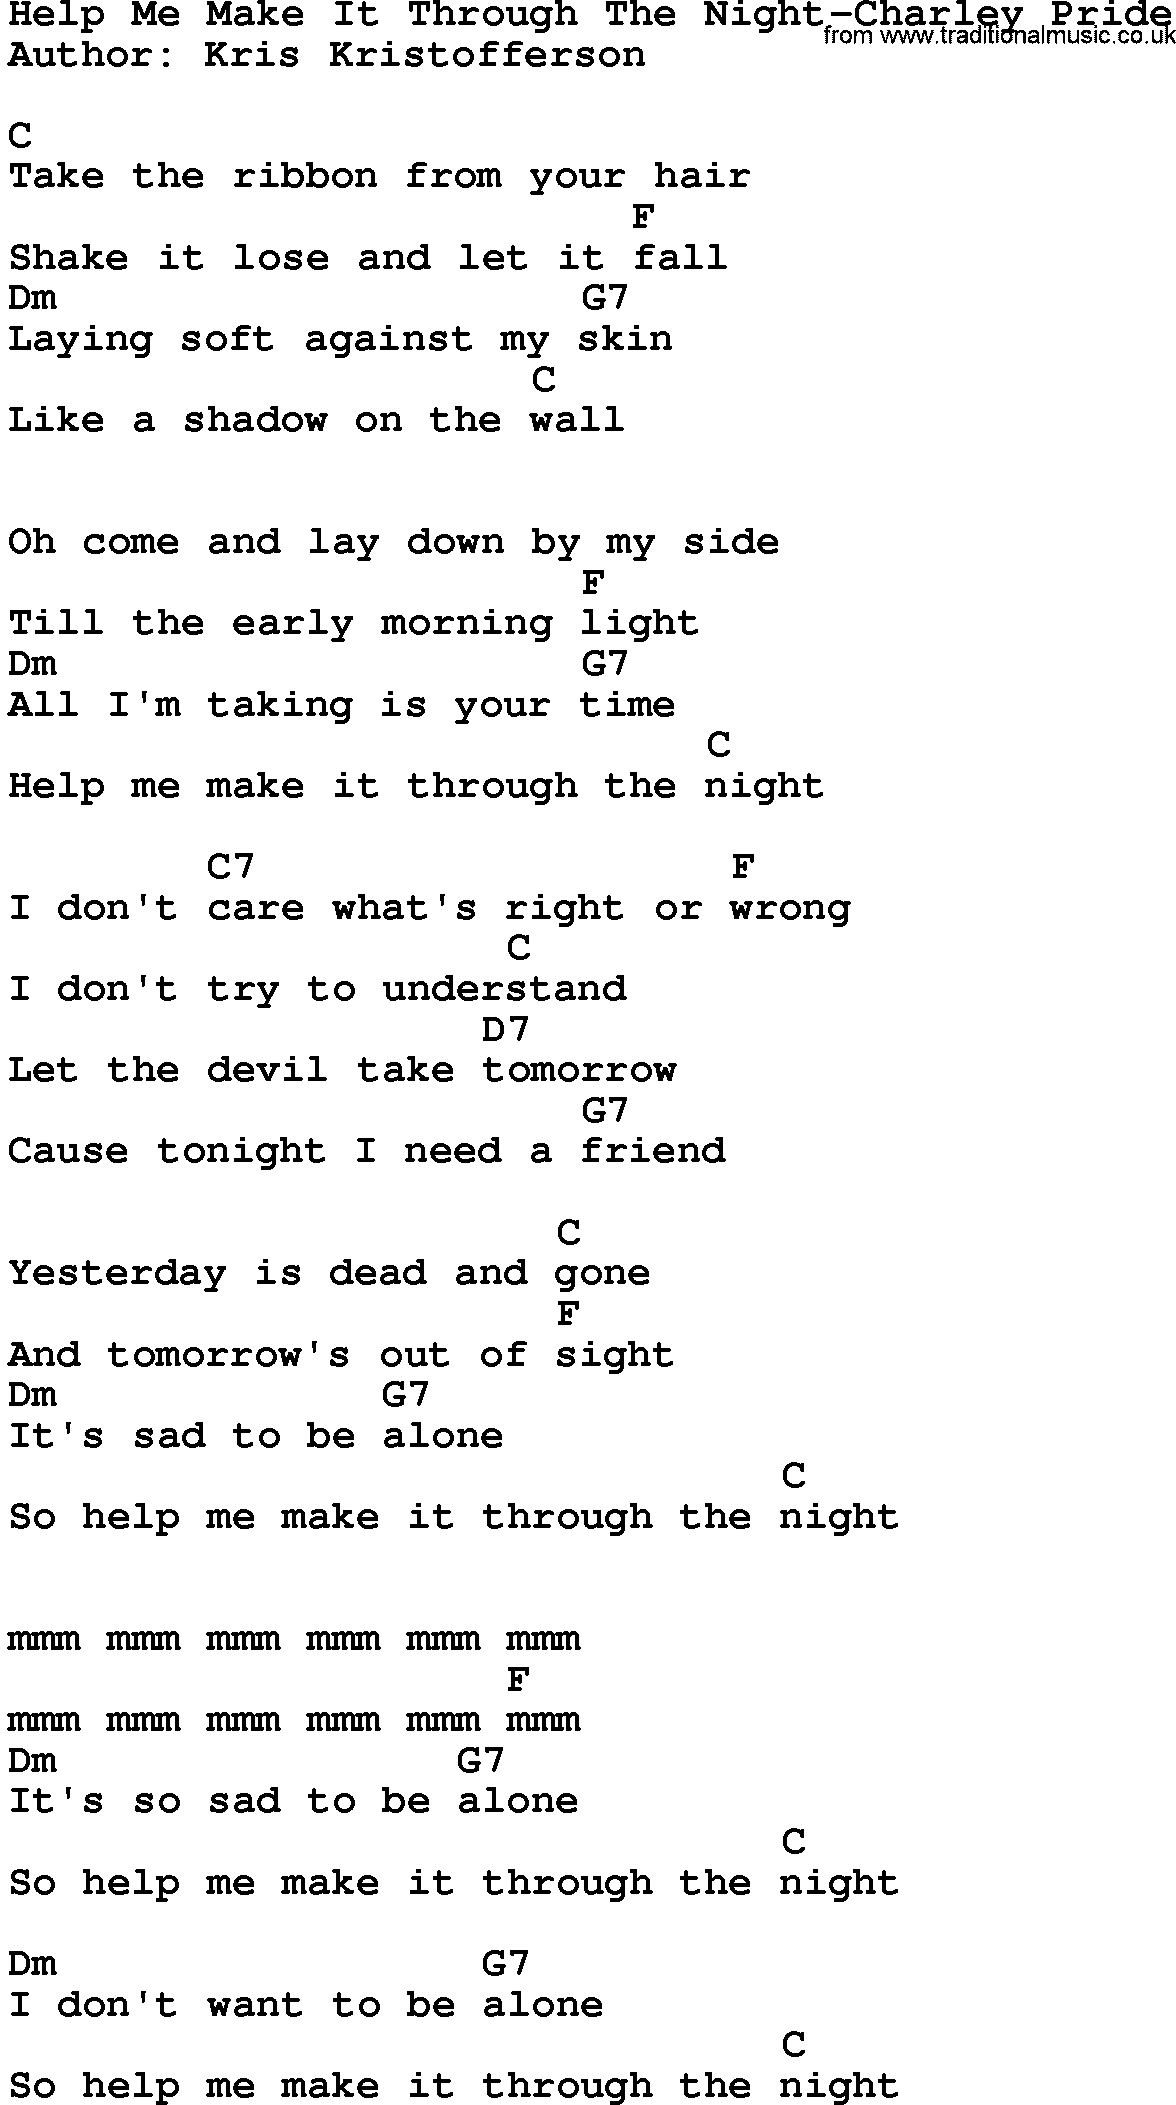 Country music song: Help Me Make It Through The Night-Charley Pride lyrics and chords